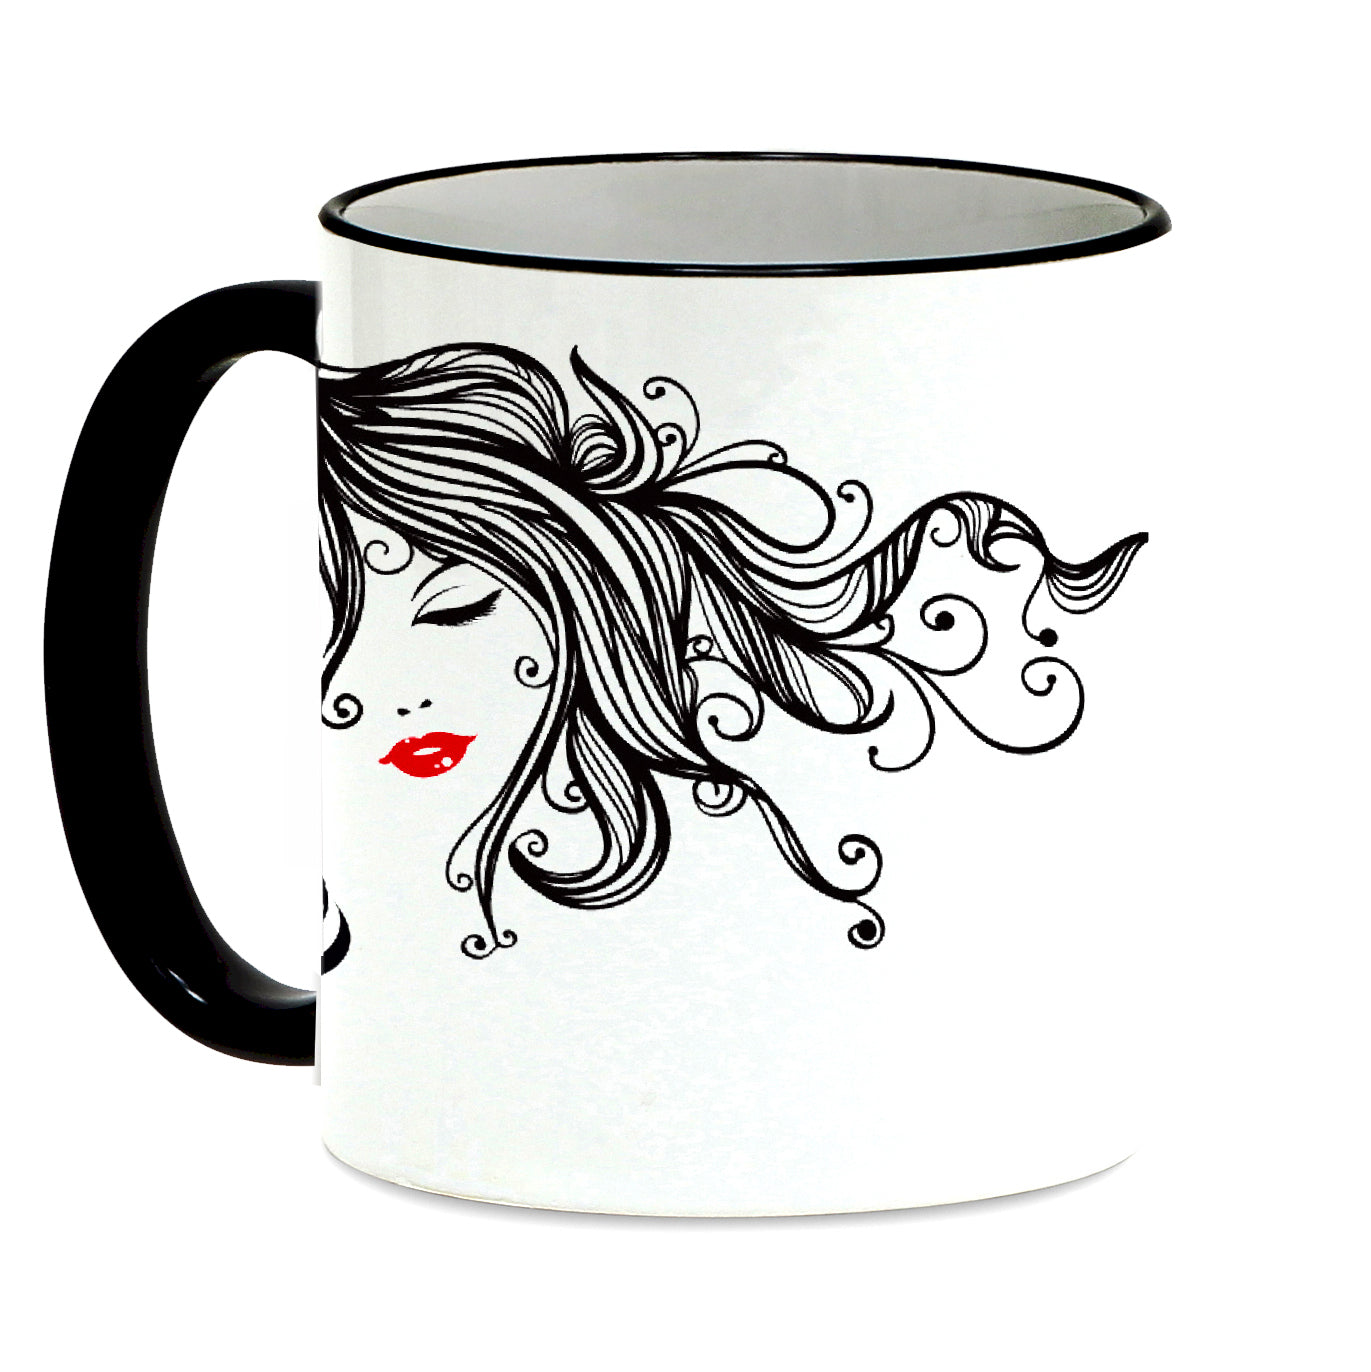 SUBLIMART: Bella Donna Lineart - Mug with black handle and rim featuring styled hand drawn trendy women profiles drawings.